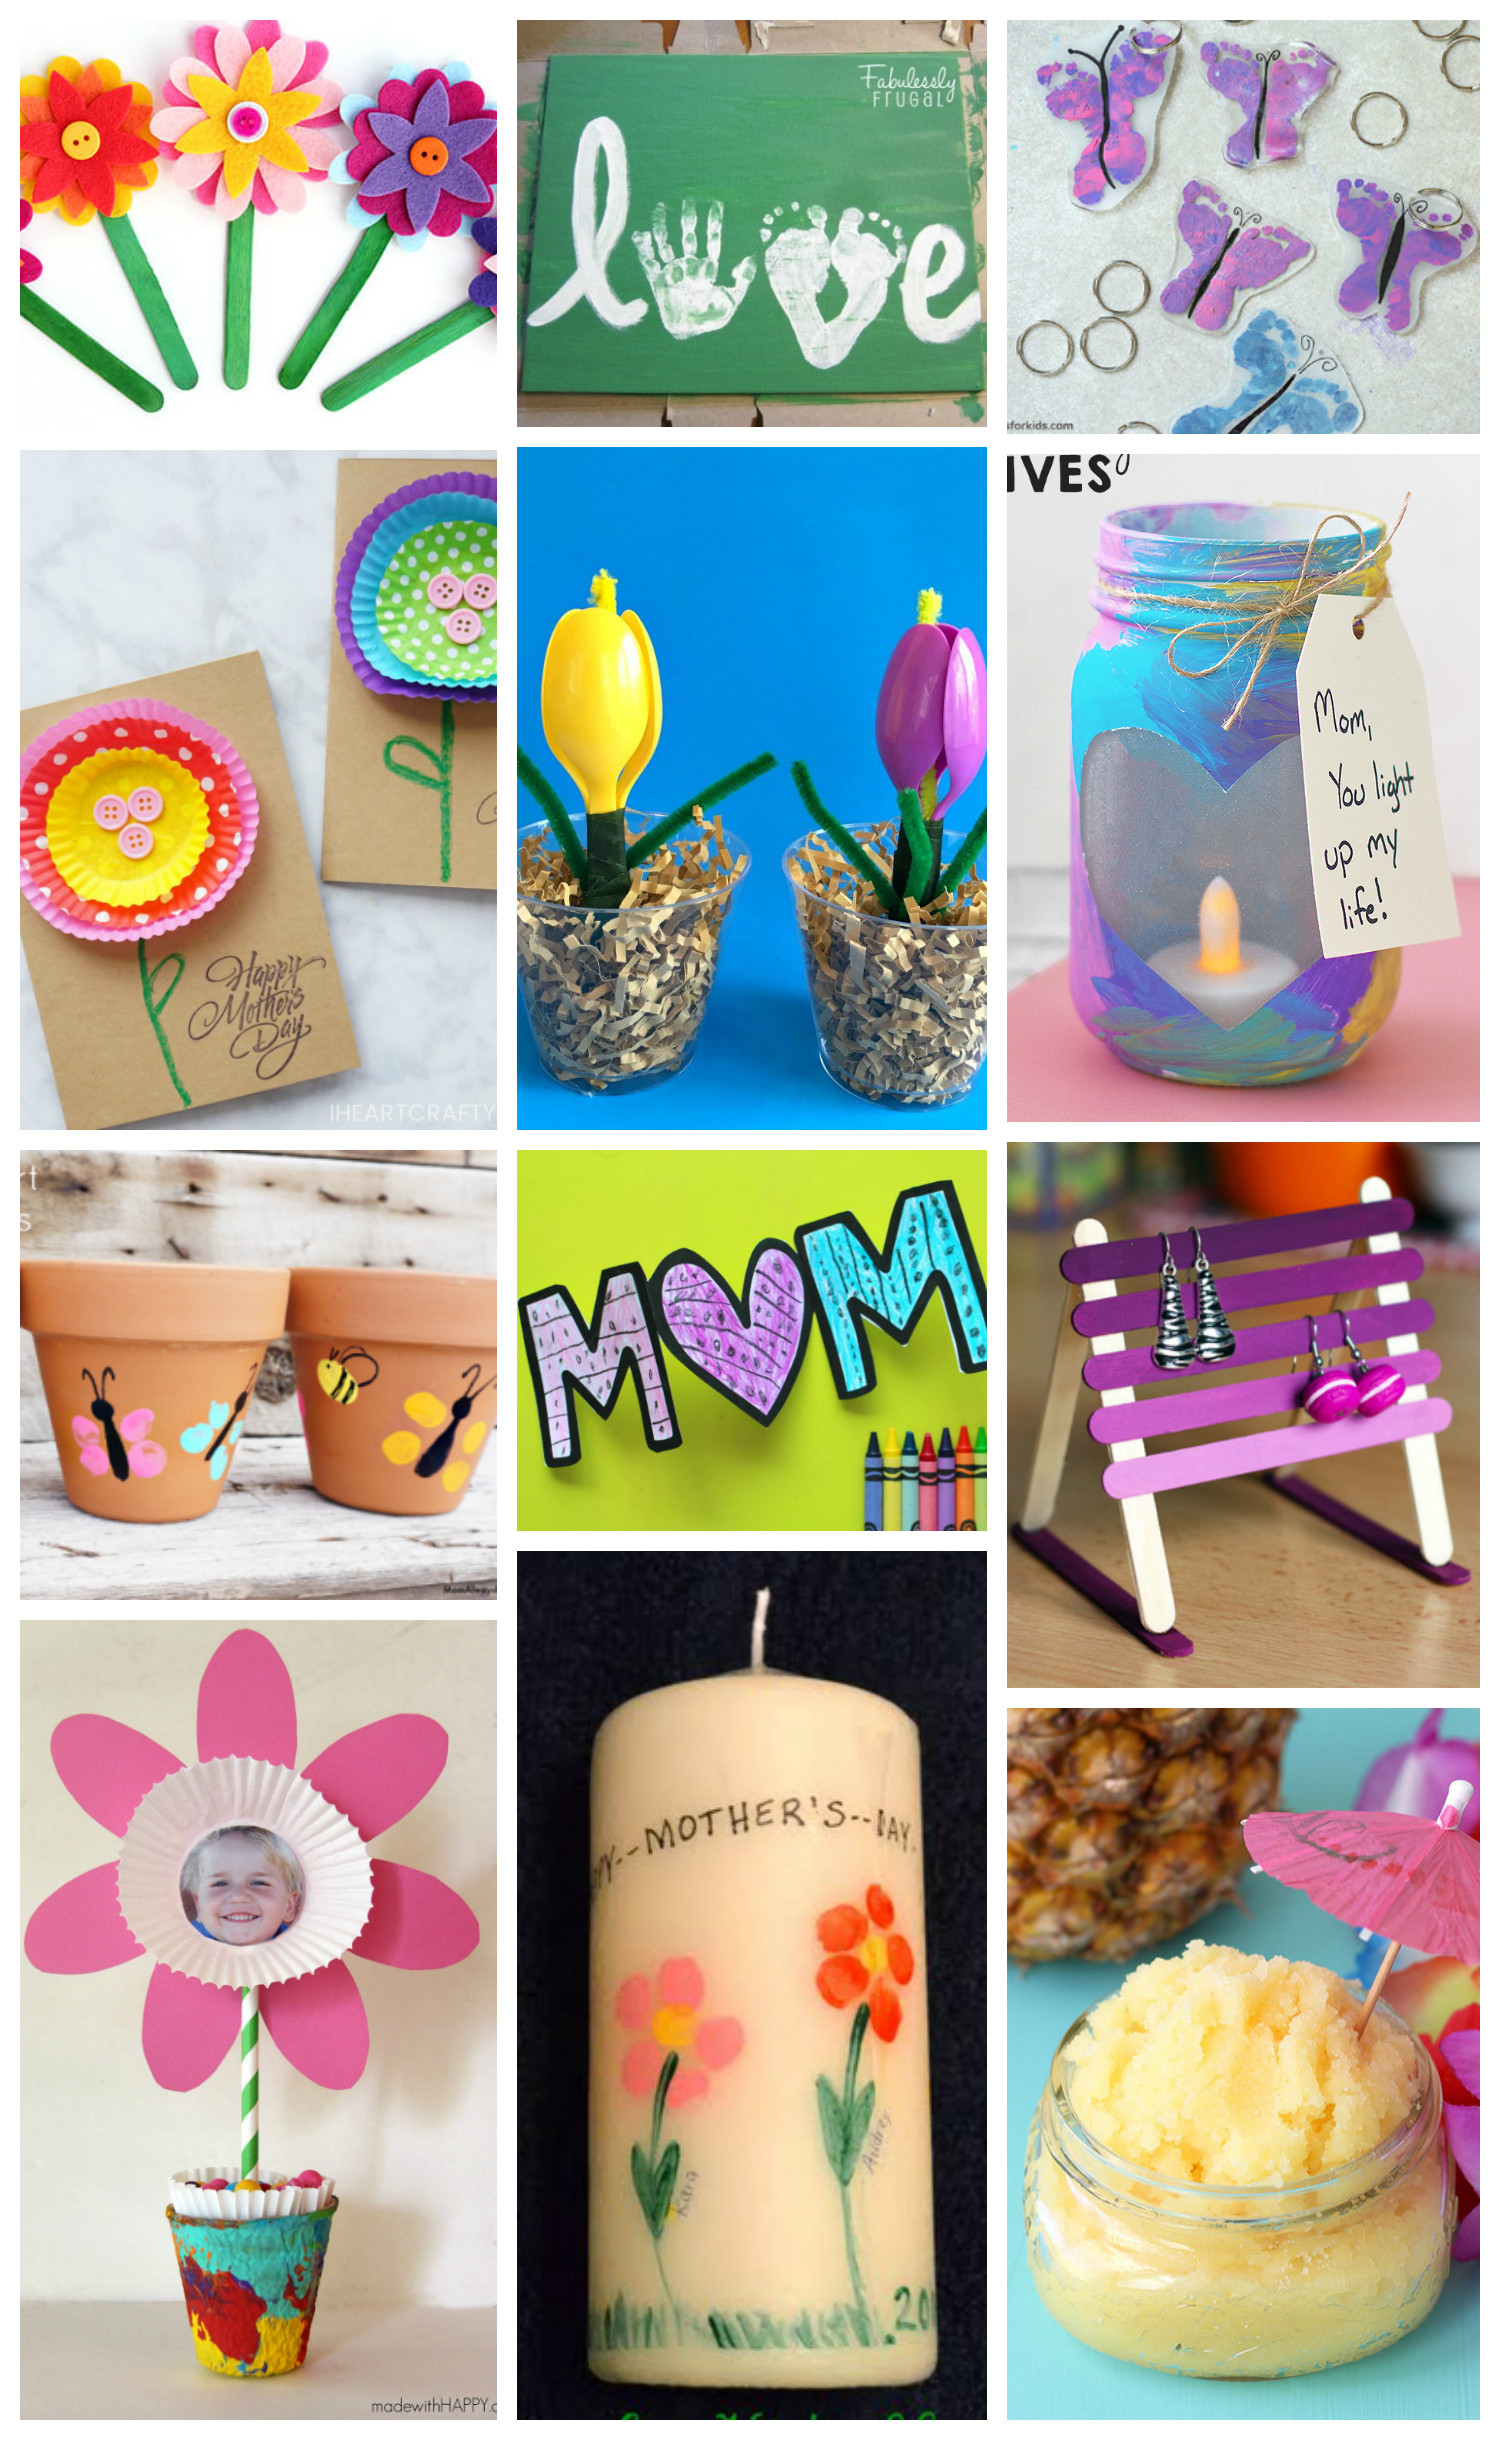 Craft Ideas For Mothers Day
 Easy Mother s Day Crafts for Kids Happiness is Homemade